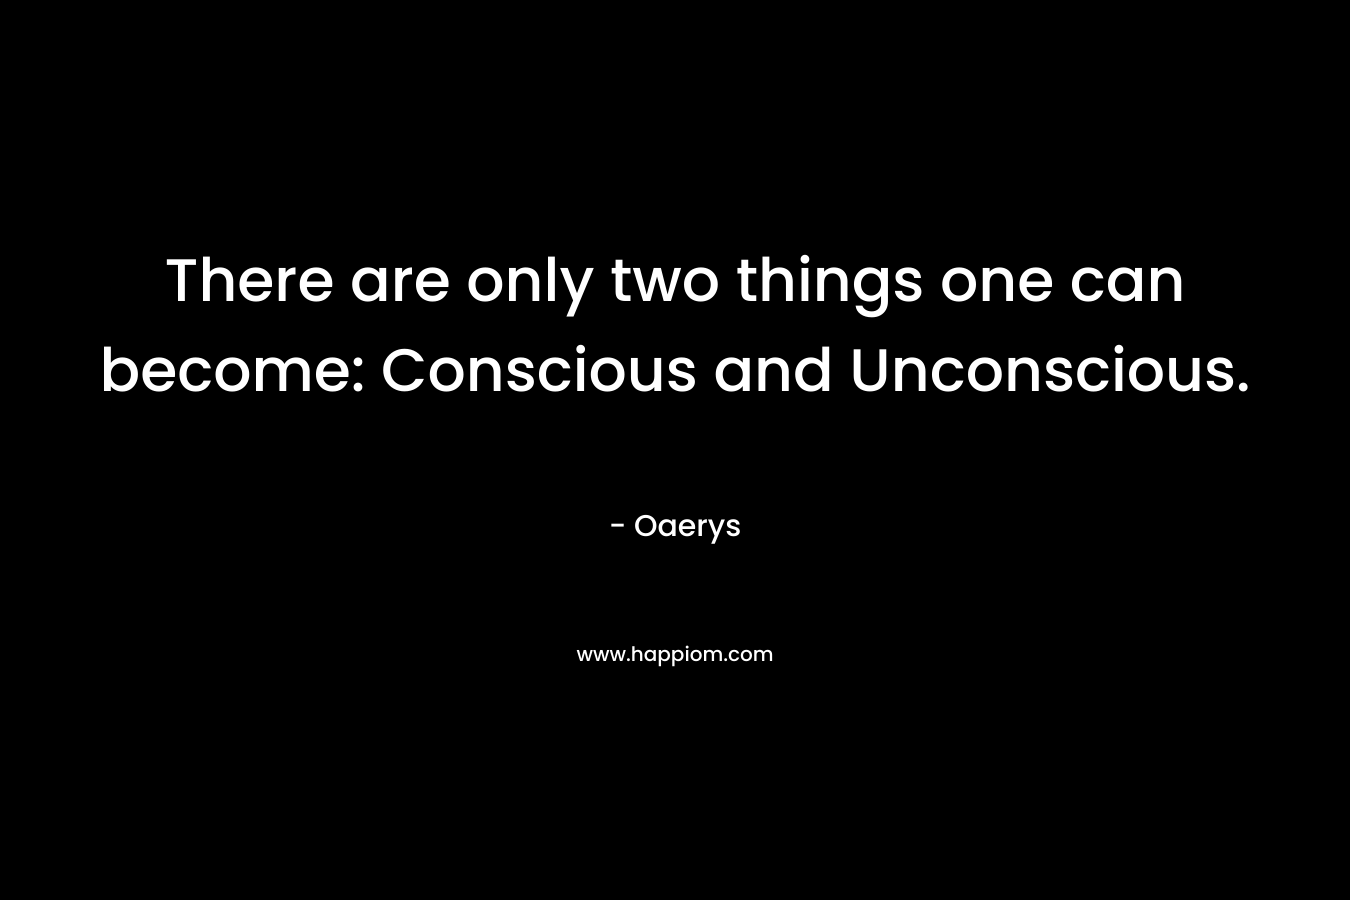 There are only two things one can become: Conscious and Unconscious.